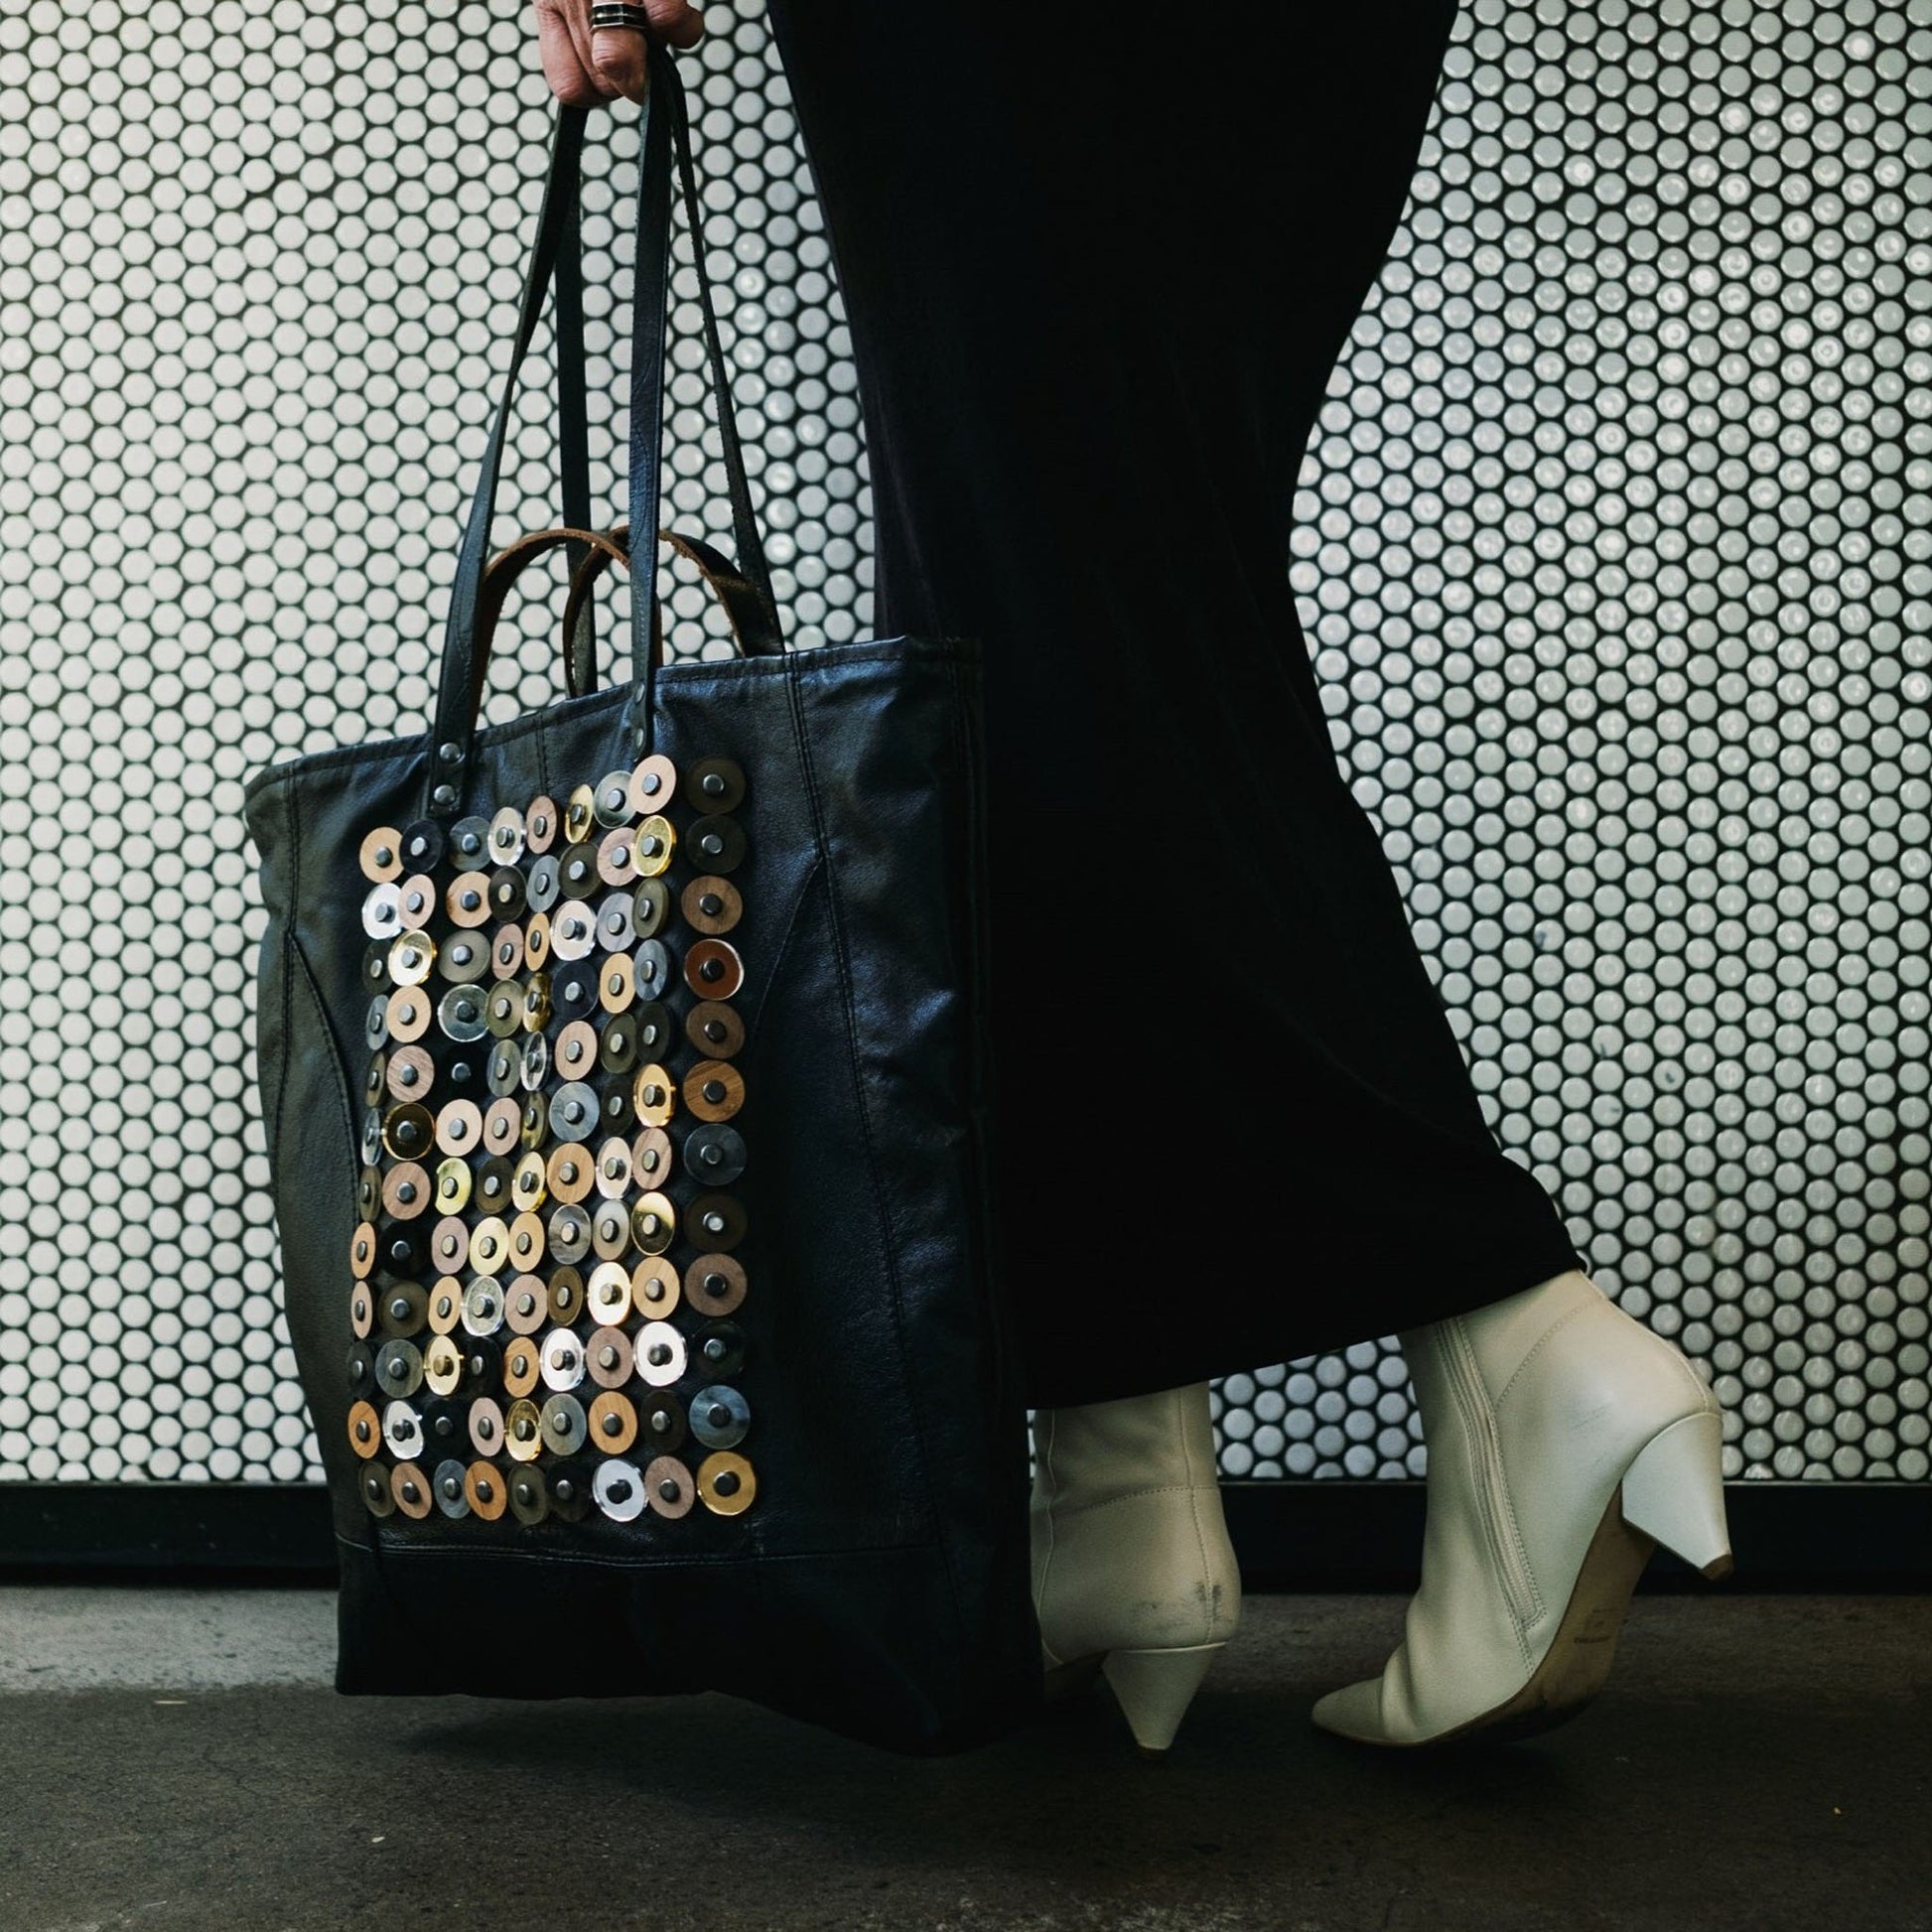 METANoIA black recycled leather tote handbag with  circle bamboo, walnut and acrylic forms fashioned into a repeative fashion with a smaller circle overlay on each form.  Model holding the bag by her side infront of a white mosaic bar.